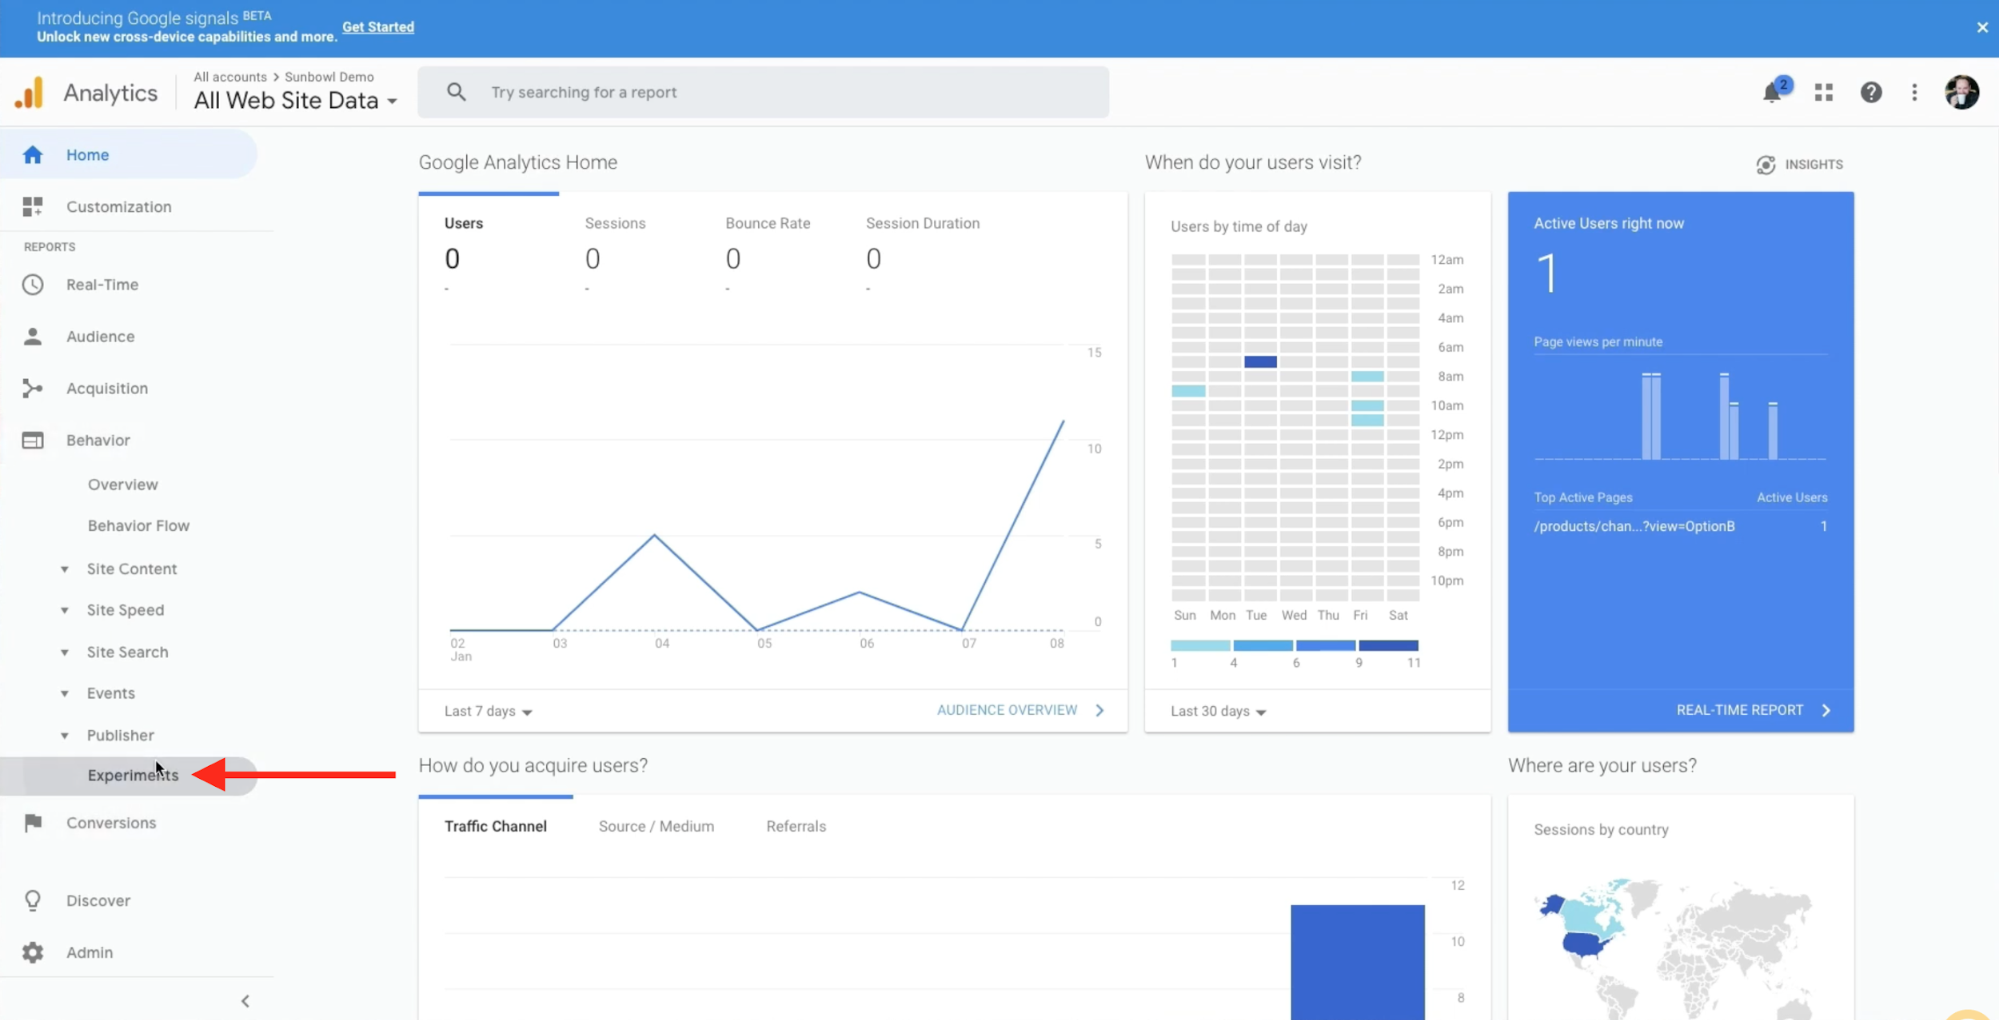 Merchant is setting up a behaviour experiment within the Google Analytics dashboard